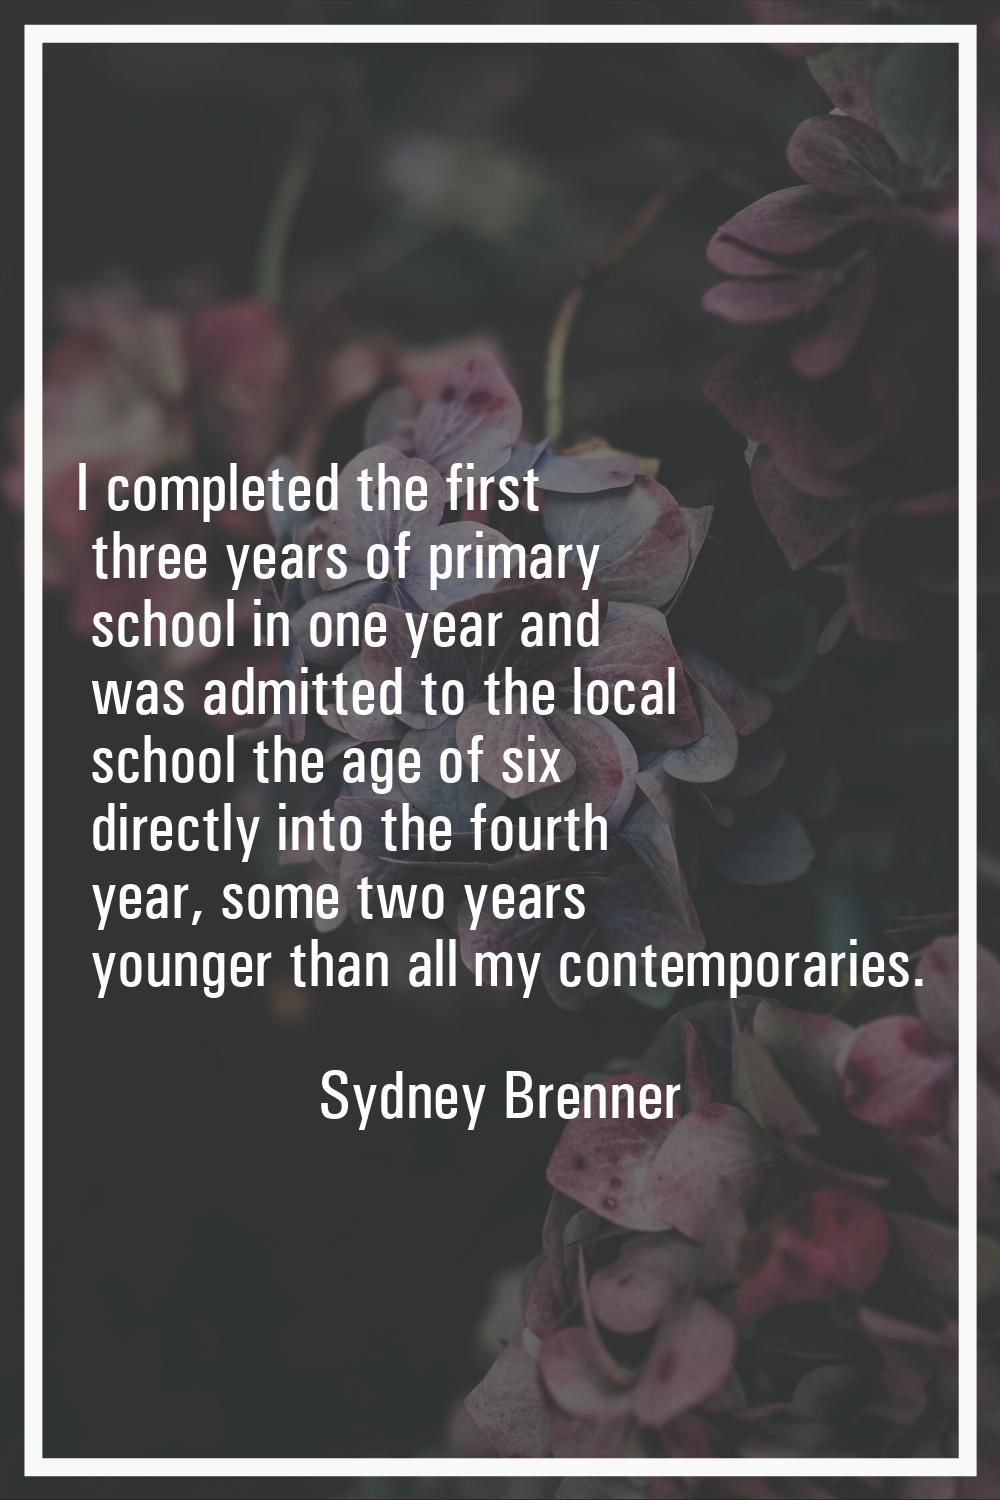 I completed the first three years of primary school in one year and was admitted to the local schoo